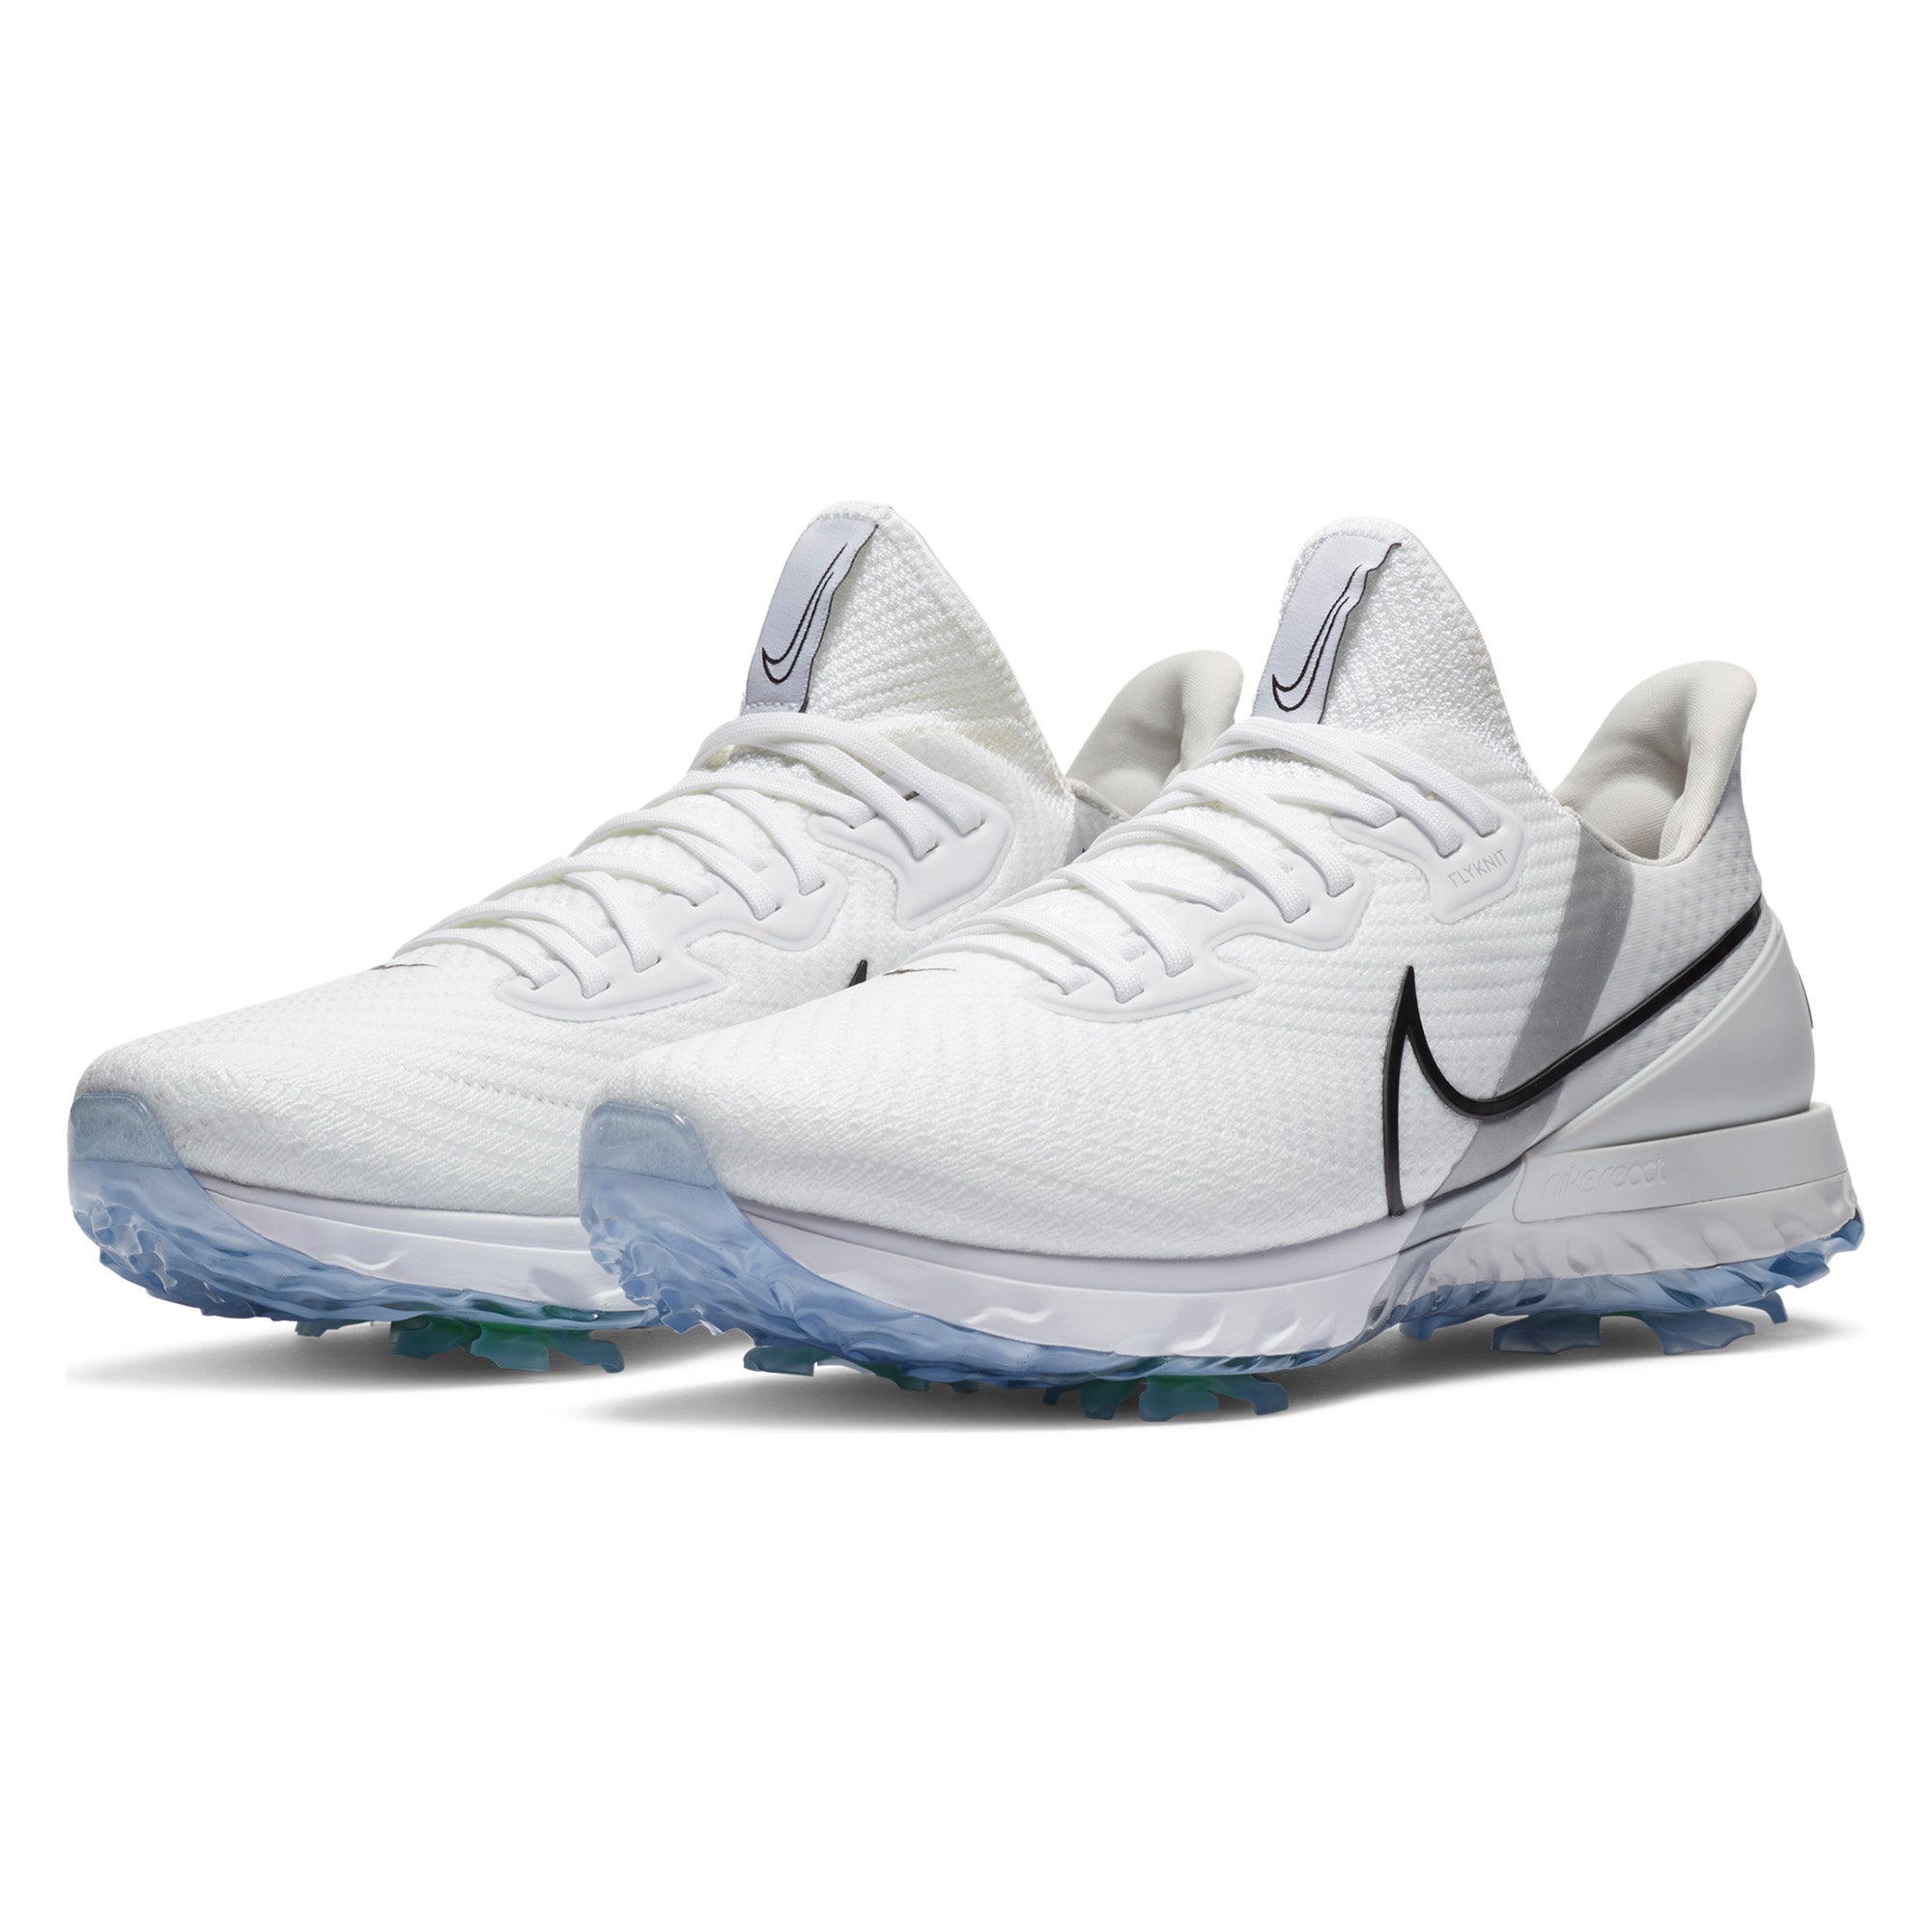 Nike Golf Air Zoom Infinity Tour Shoes CT0540 White & Function18